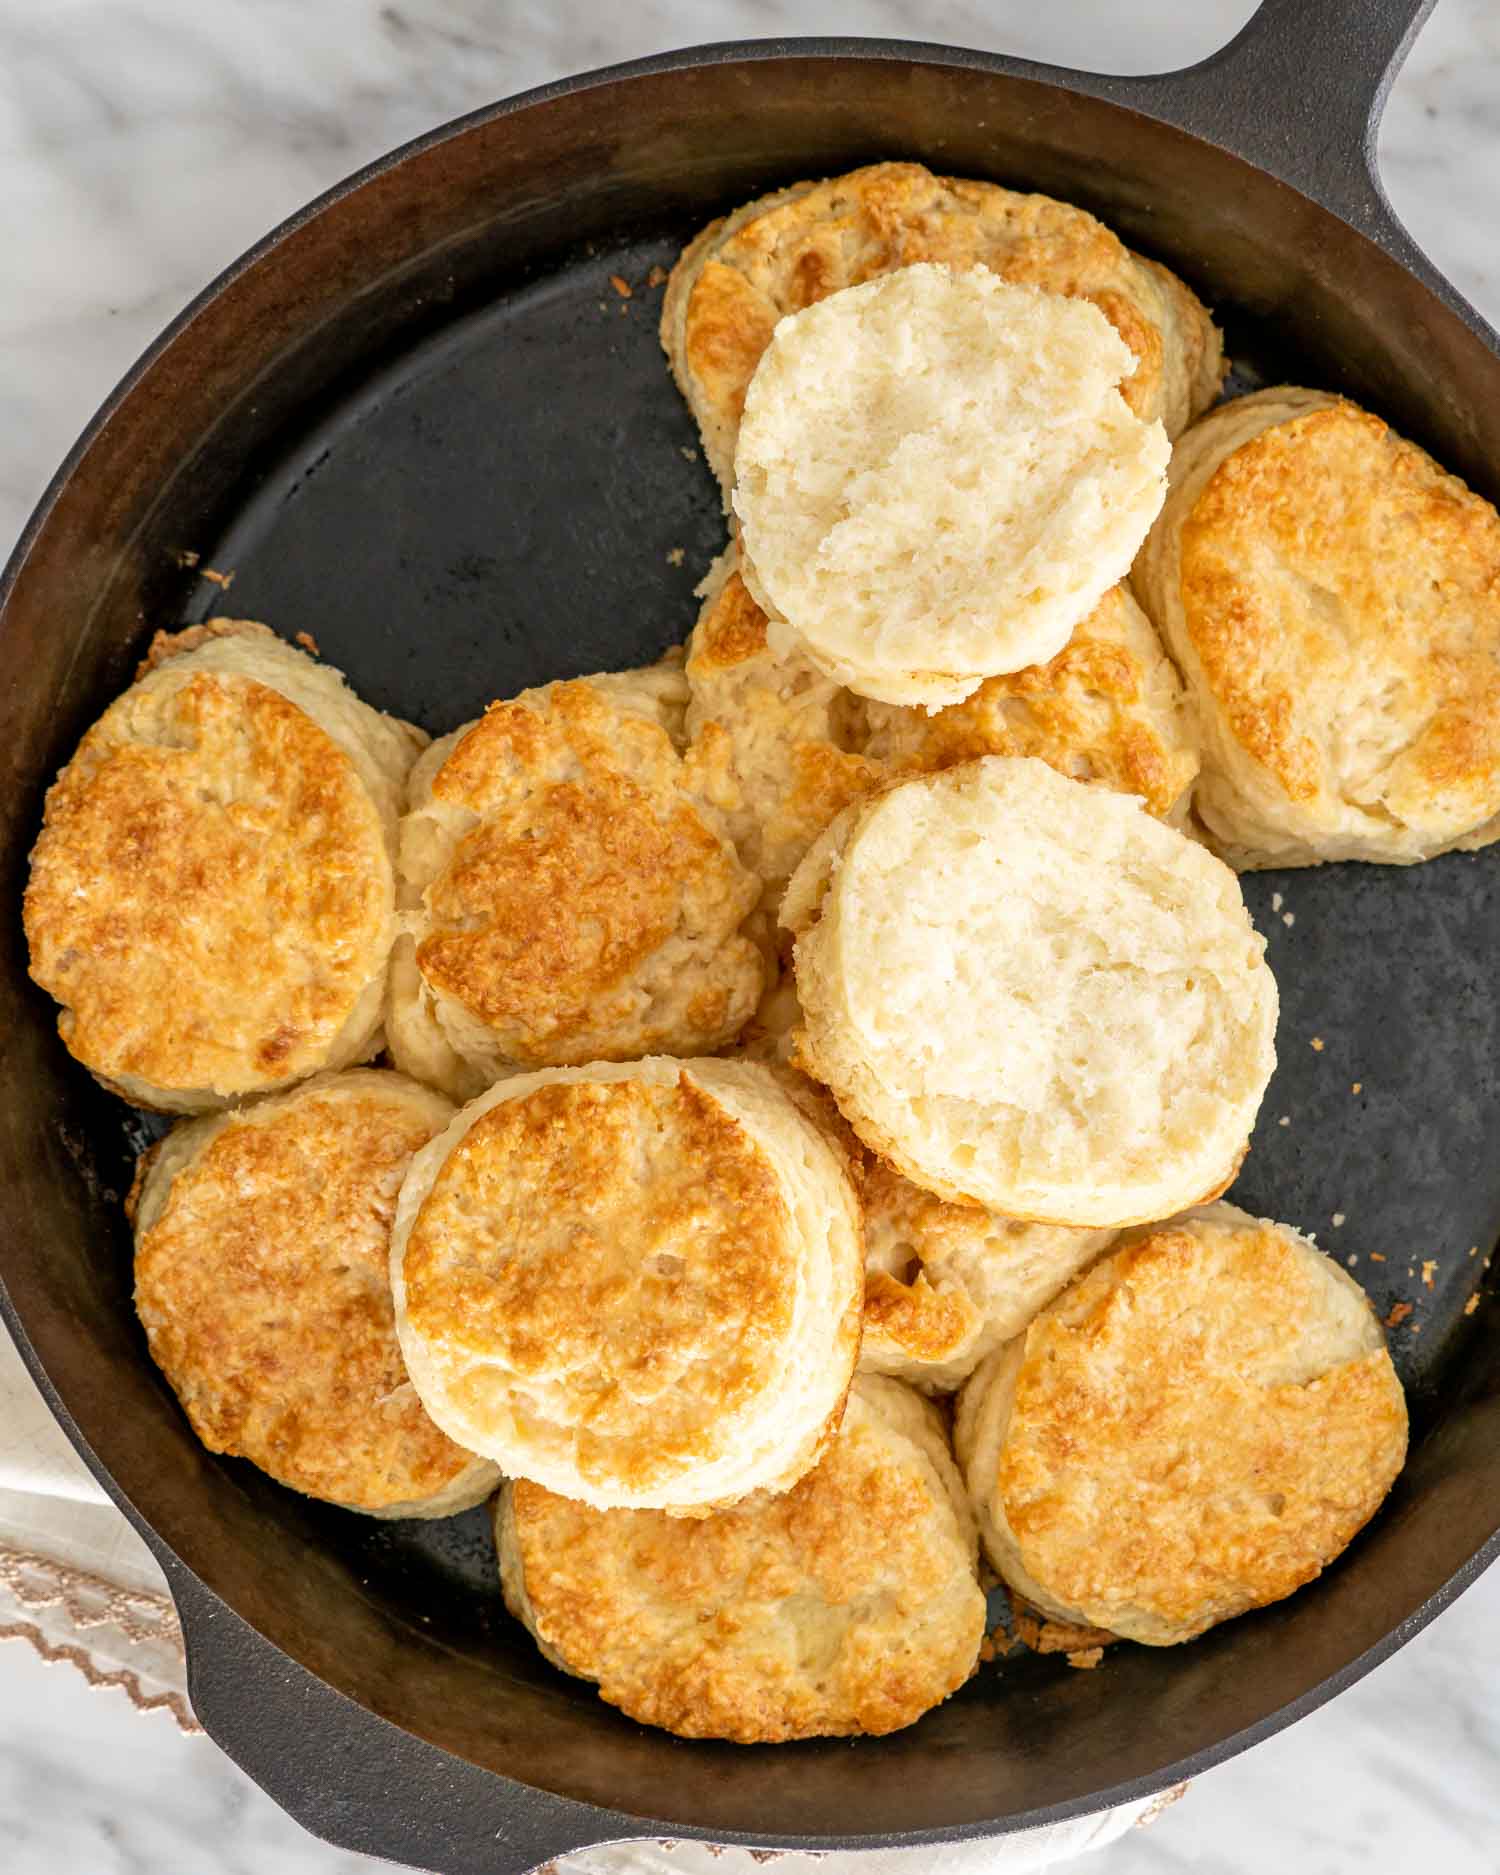 buttermilk biscuits freshly baked in a cast iron skillet.